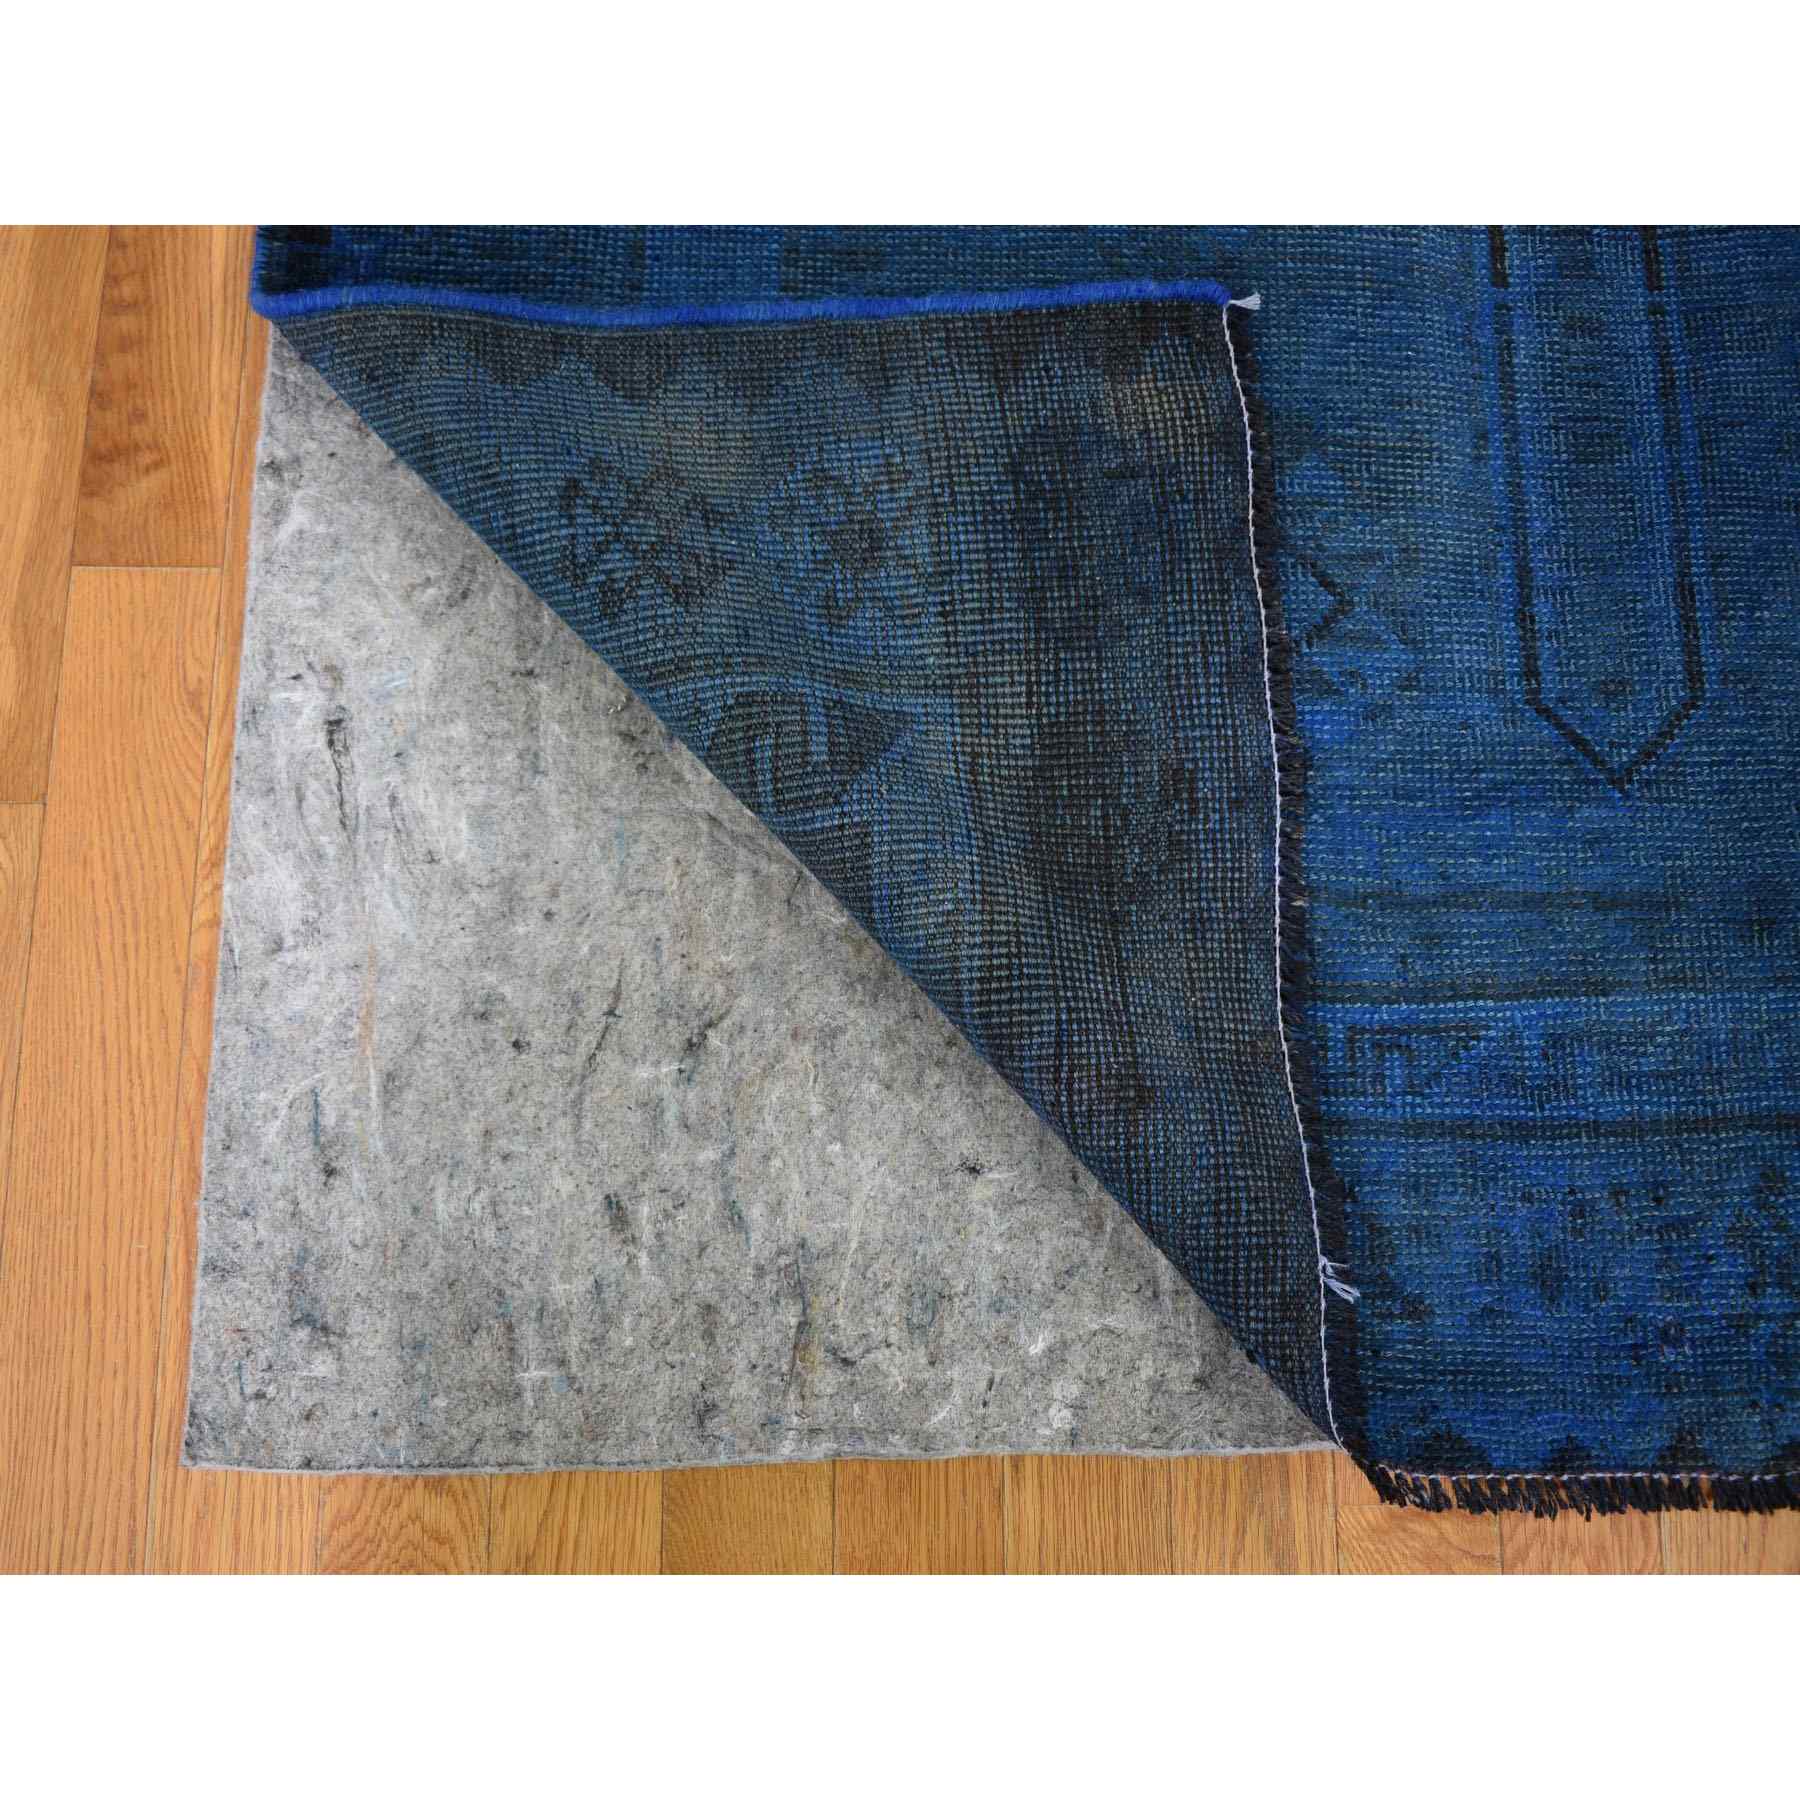 Overdyed-Vintage-Hand-Knotted-Rug-295925